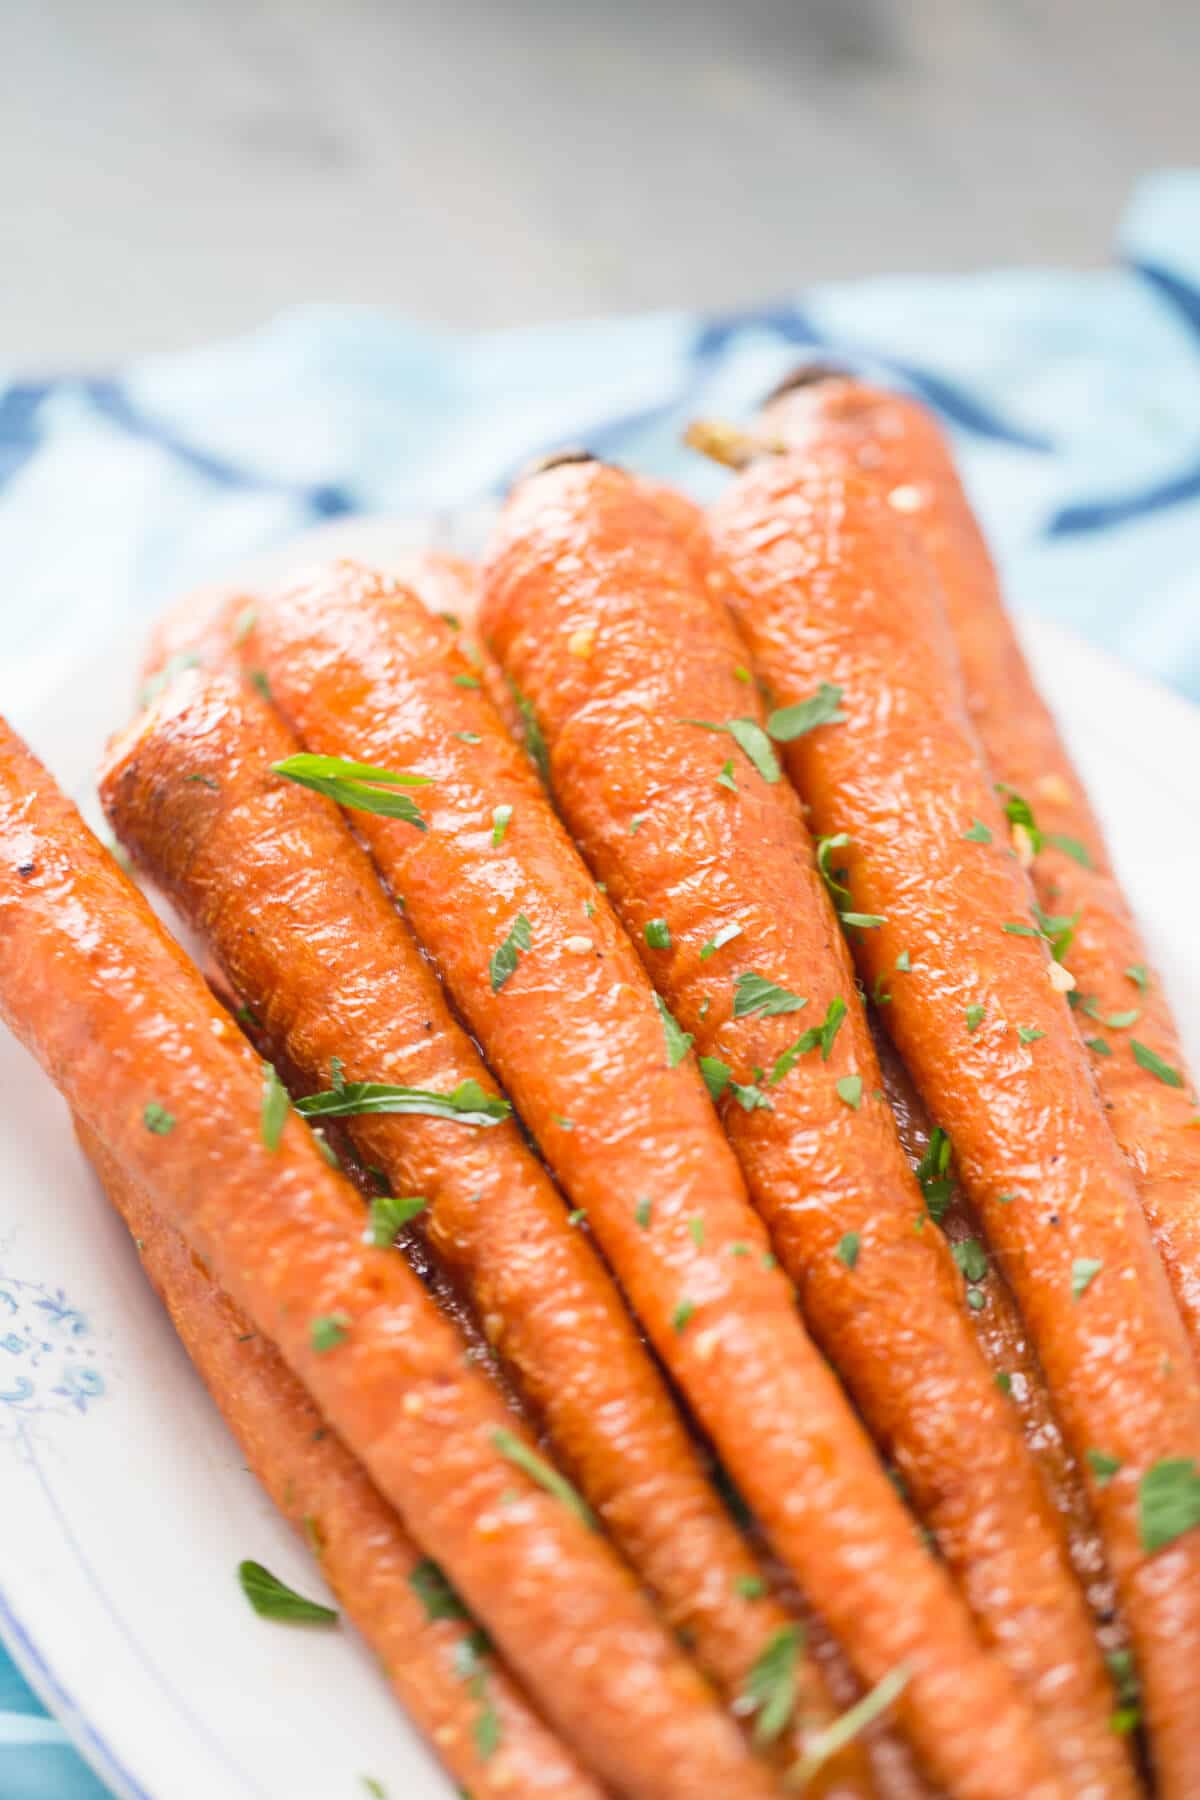 Oven roasted carrots make an easy side dish! They so sweet and delicious!